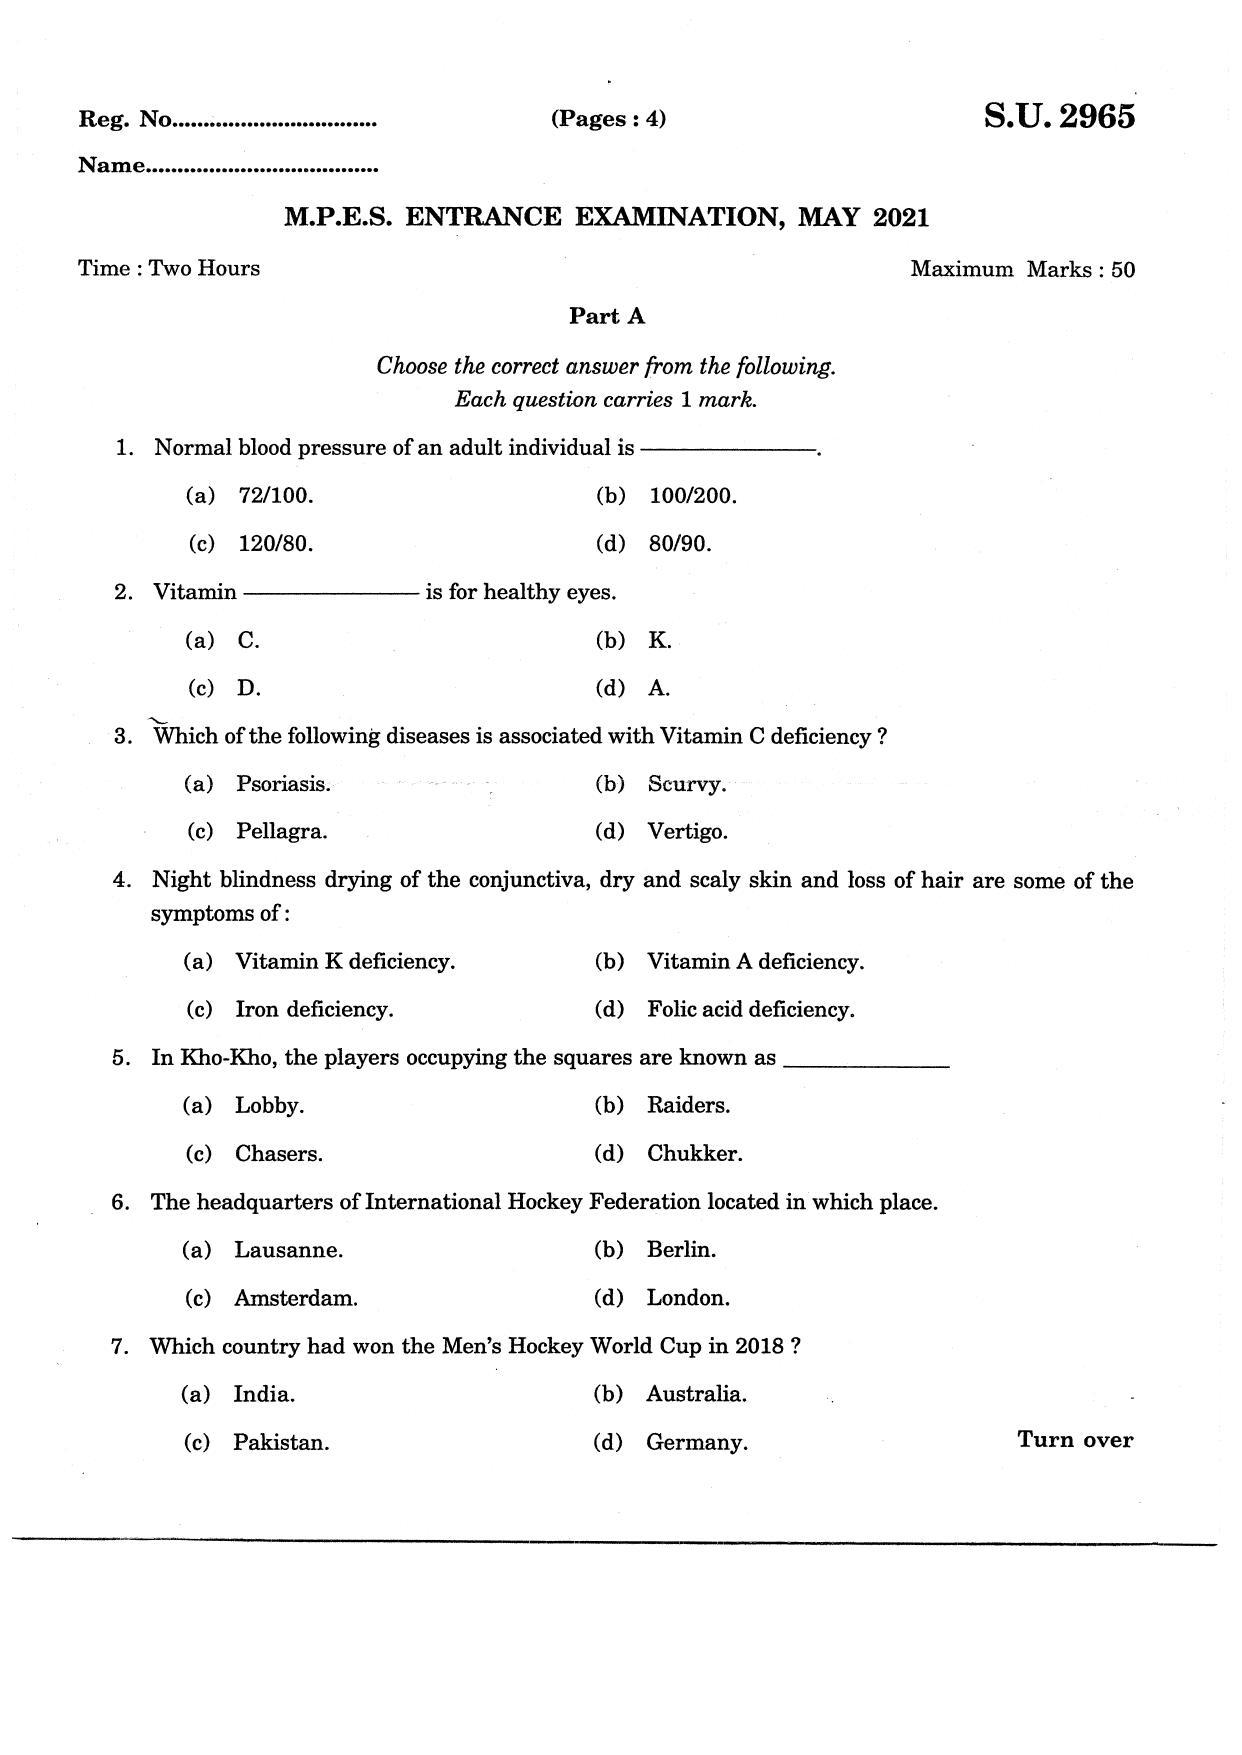 SSUS Entrance Exam MPES 2021 Question Paper - Page 1